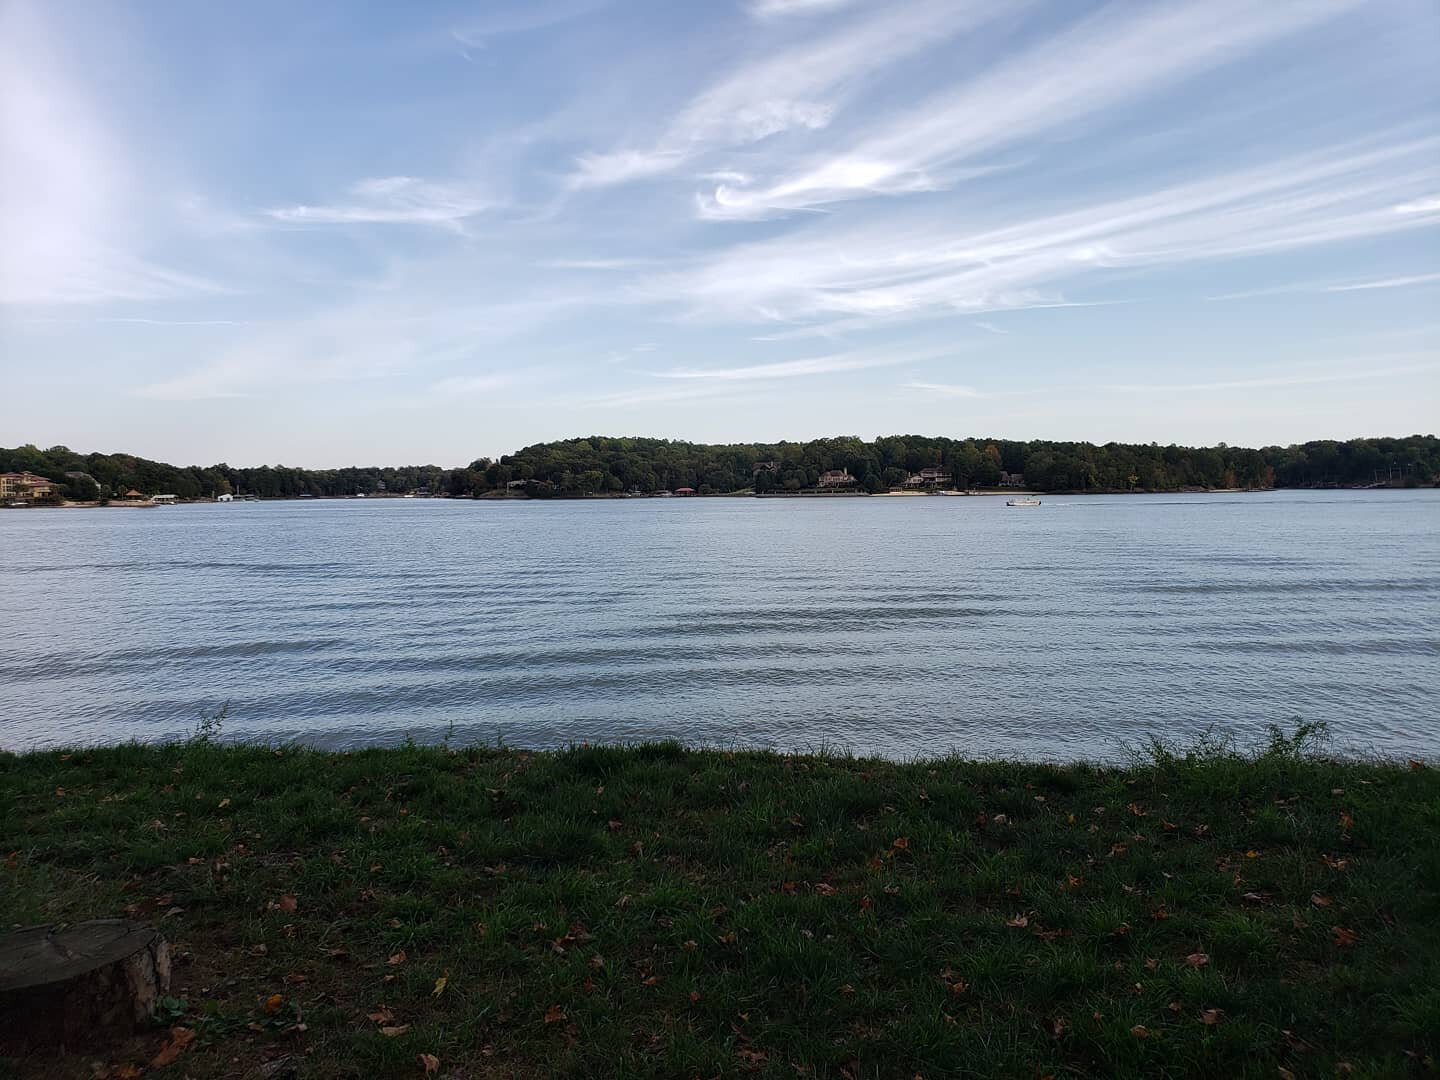 It's a beautiful day in the neighborhood... A beautiful day to be a neighbor.  Come home to a resort... Every day!

River Hills is Lake Wylie.

Charlotte with Benefits.

#nofilter

#lakefrontliving #gatedcommunity #lifestyle #security #lakewylie #Cha